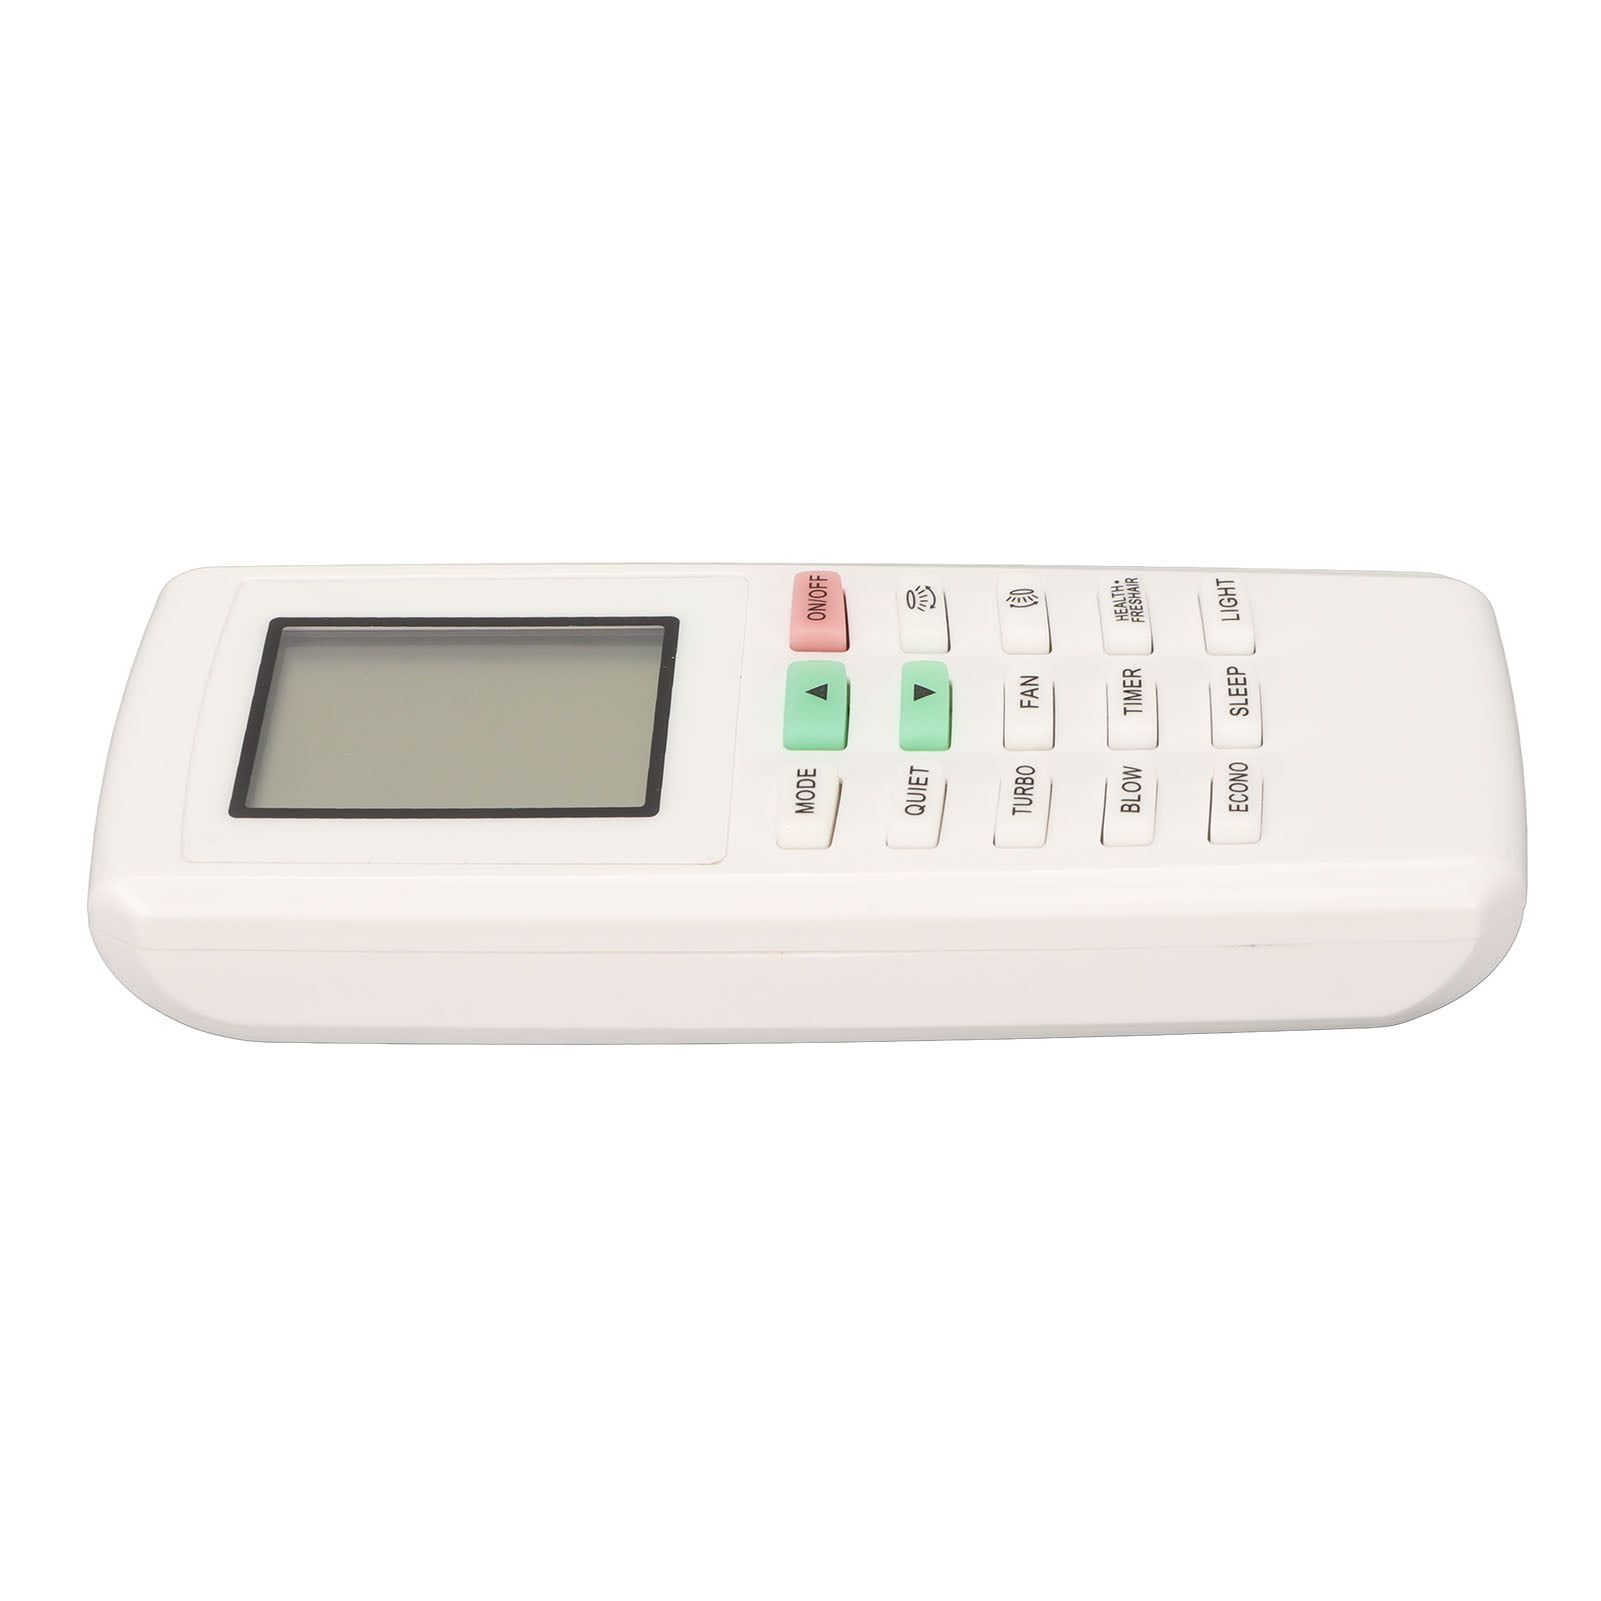 Remote Control, Universal Air Conditioner Remote Control Wear Resistant Easy Access For YV Series For YV1L1 For YV1FB7F - Walmart.com